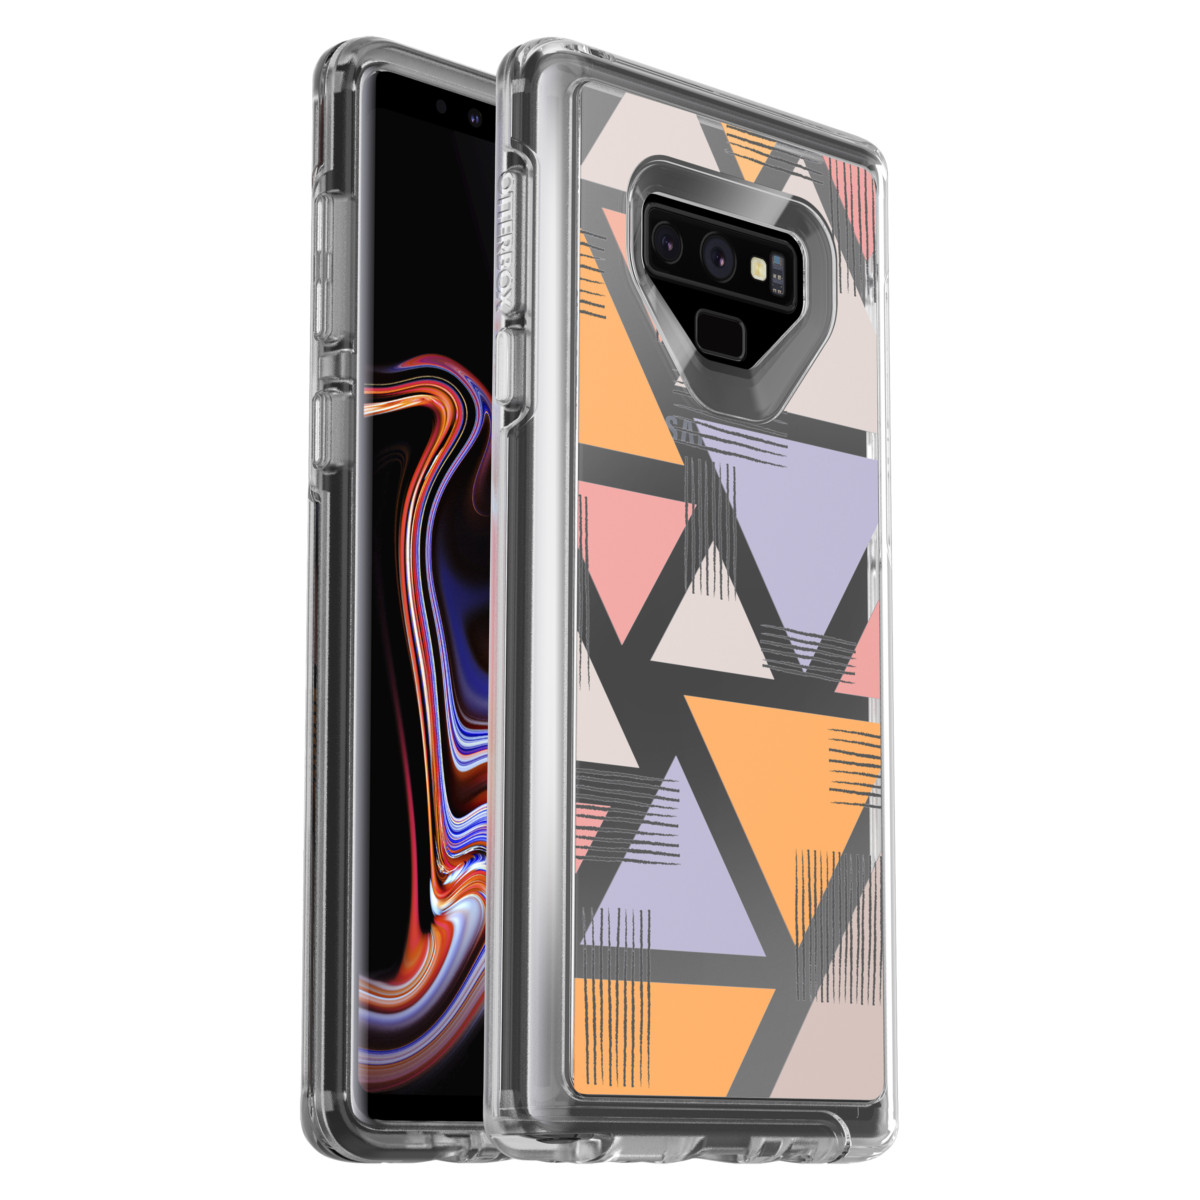 Otterbox Symmetry, Commuter and Defender Galaxy Note9 casings now available in Malaysia 3